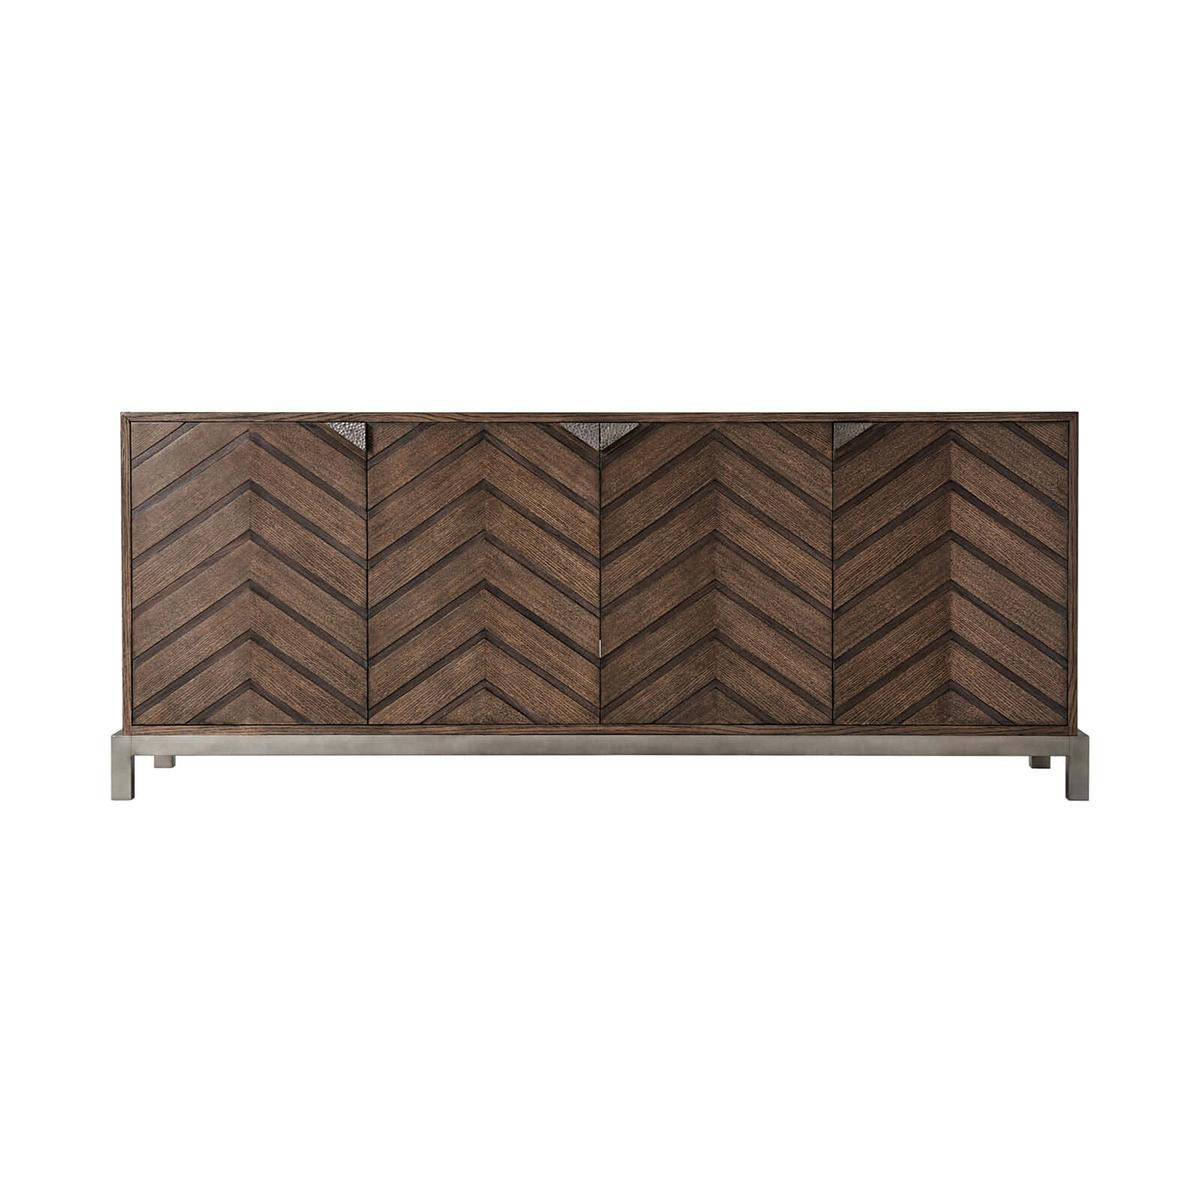 Mid-century Chevron sideboard in our Charteris finish, with a rectangular quartered oak centered top, four chevron pattern relief paneled doors, and triangular hammered metal handles on a matte tungsten finish base. Fitted with three interior